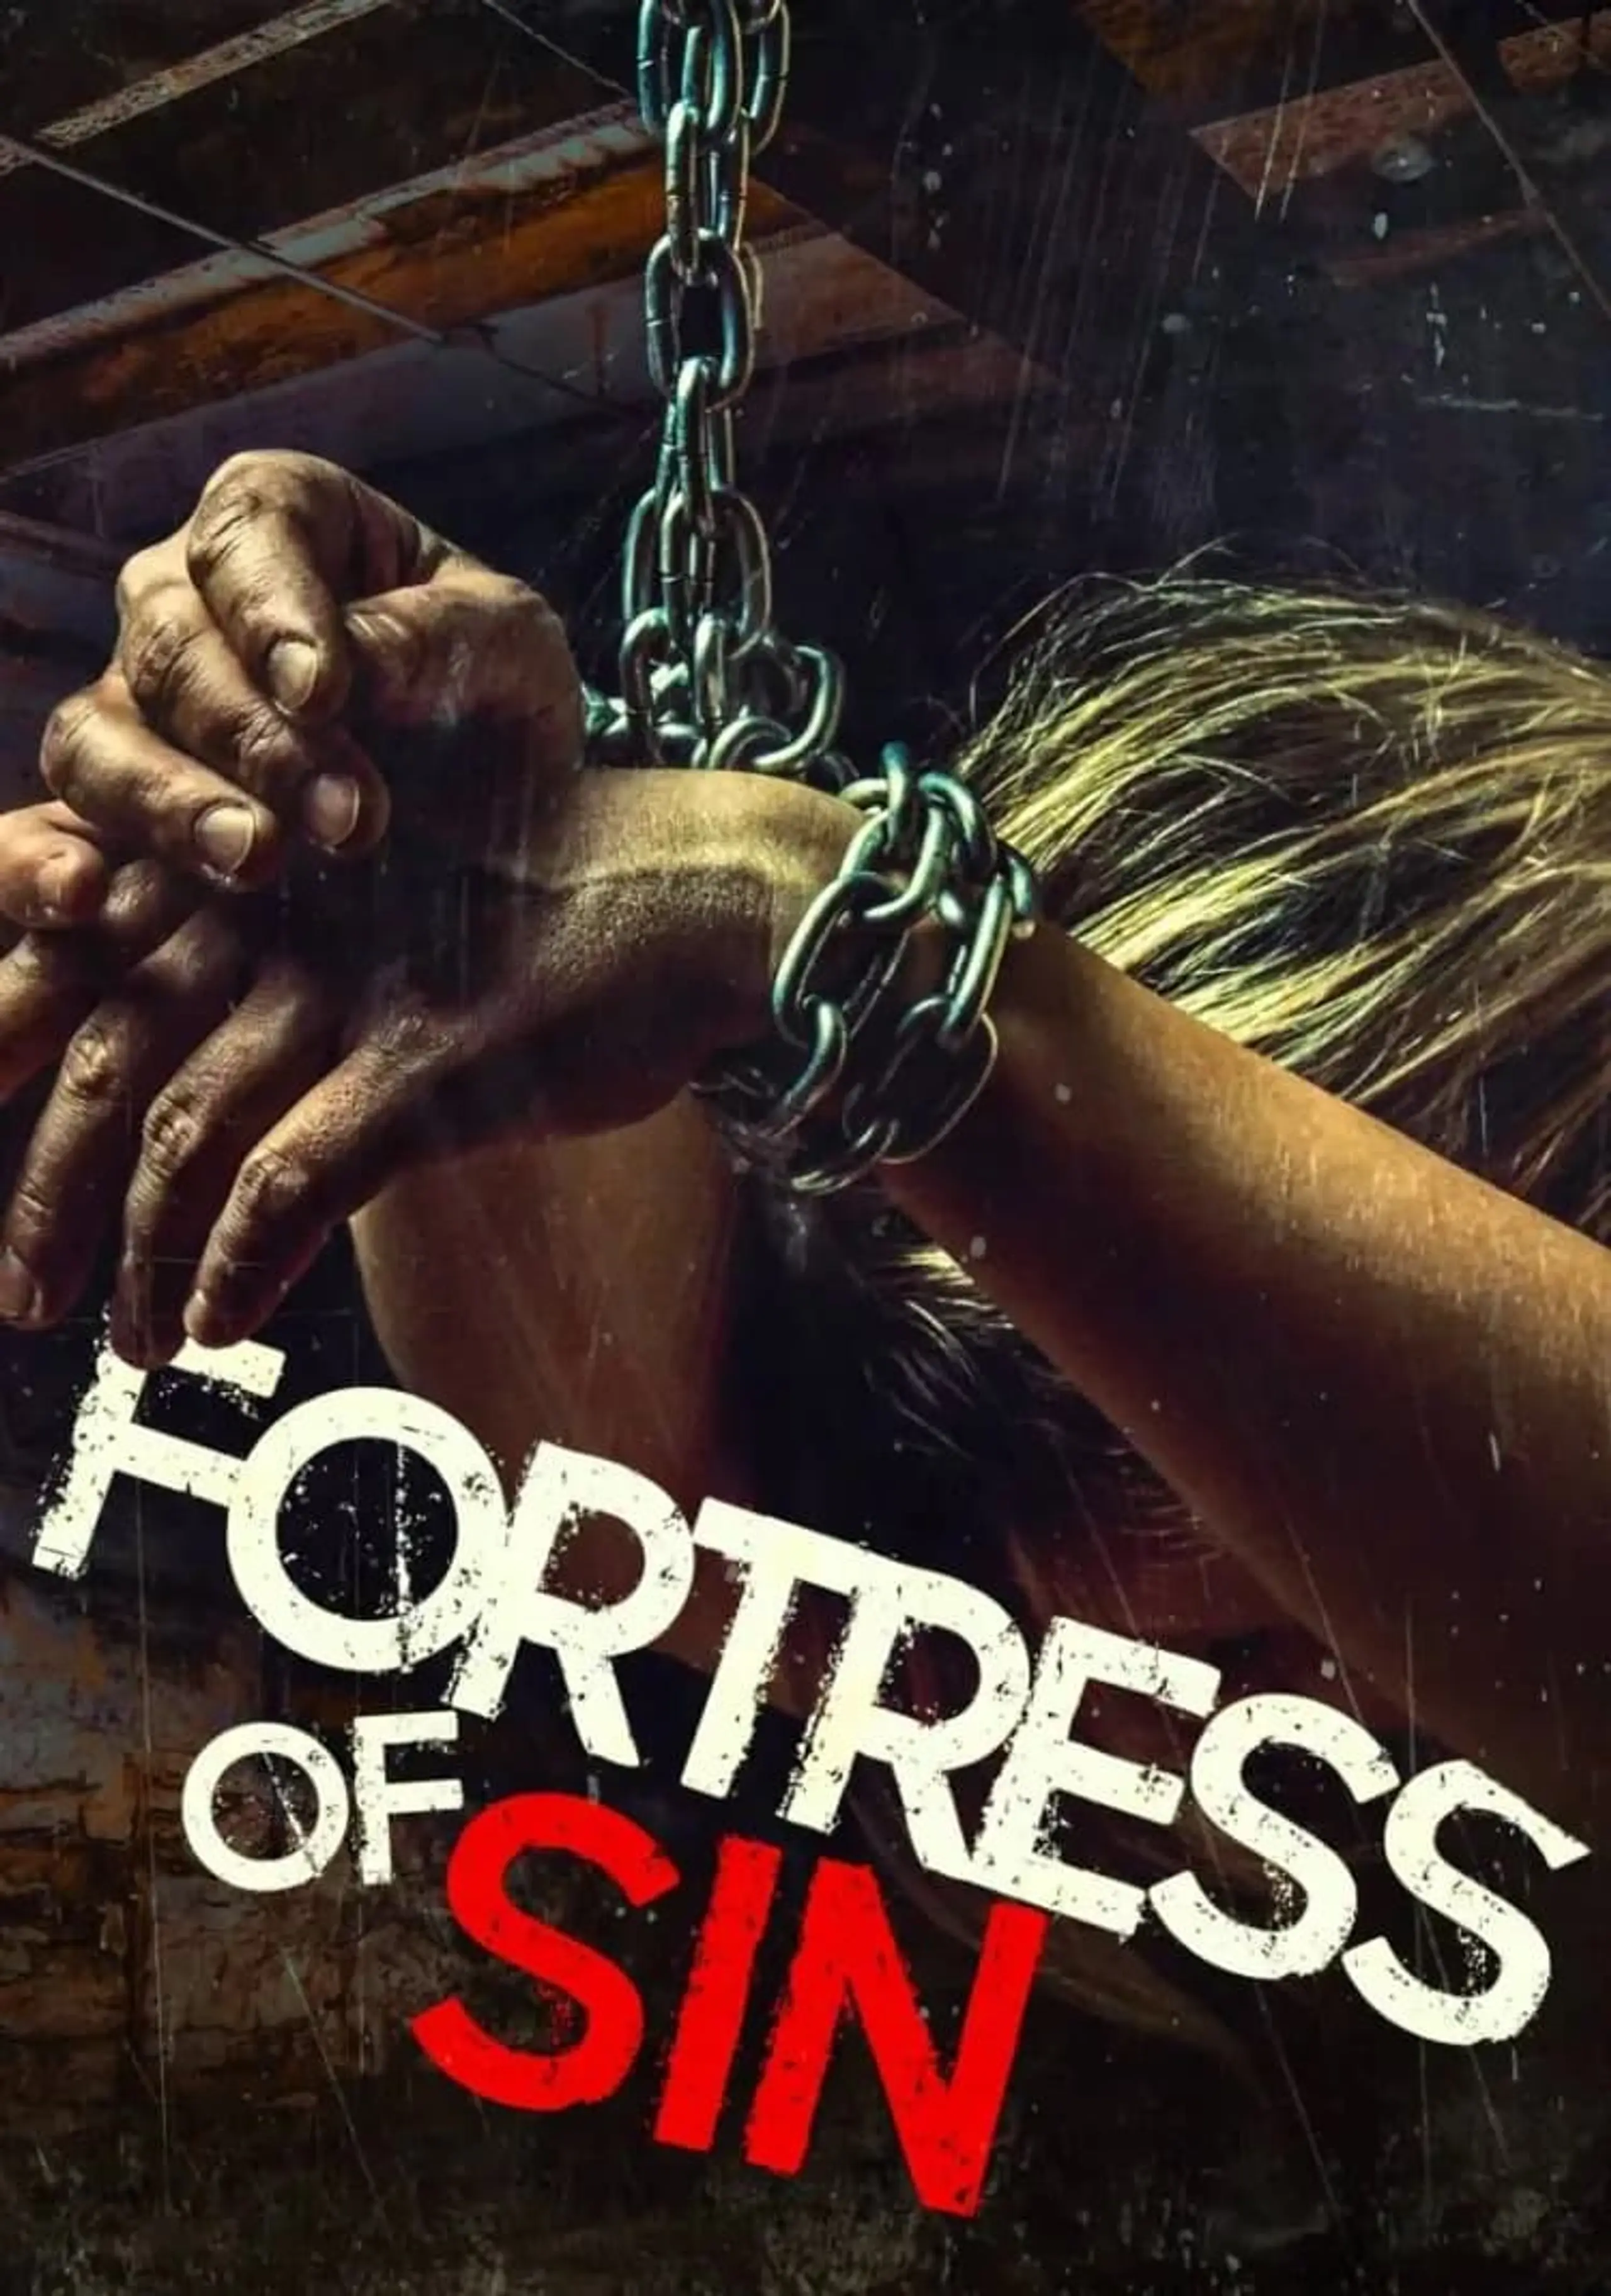 Fortess of Sin